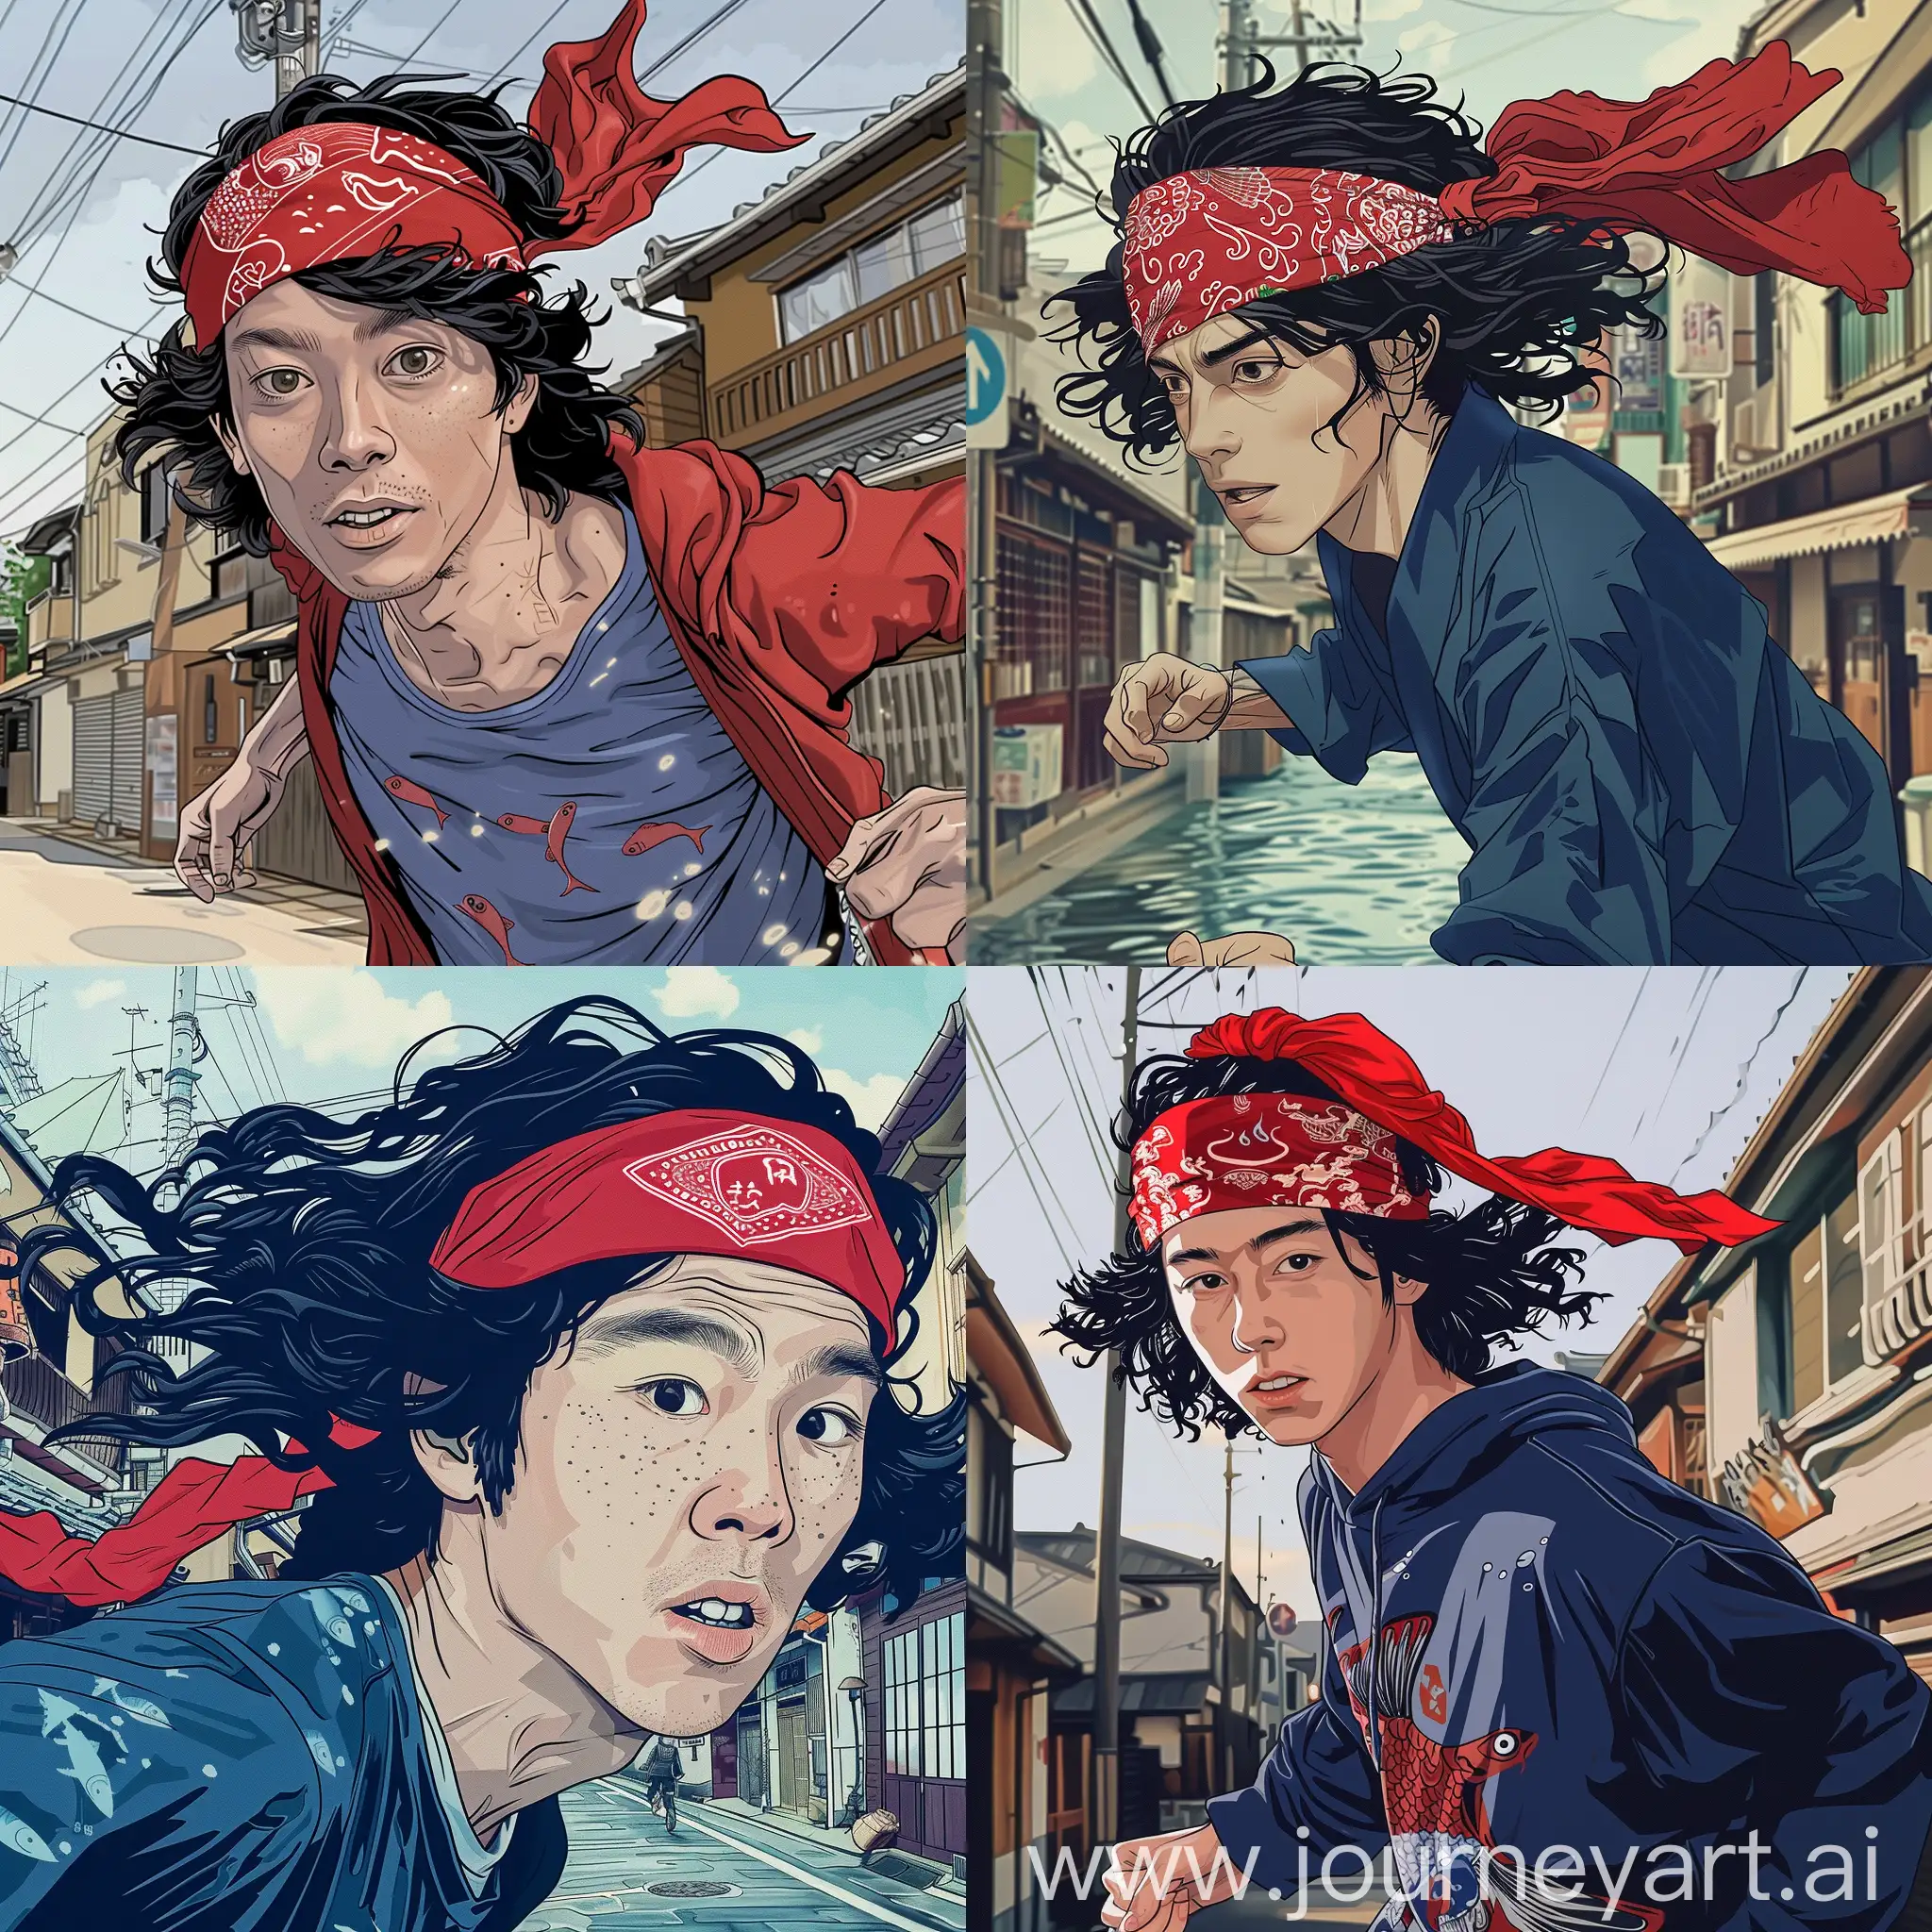 Youthful-Asian-Runner-in-Traditional-Fishman-Garb-on-Vibrant-Japanese-Street